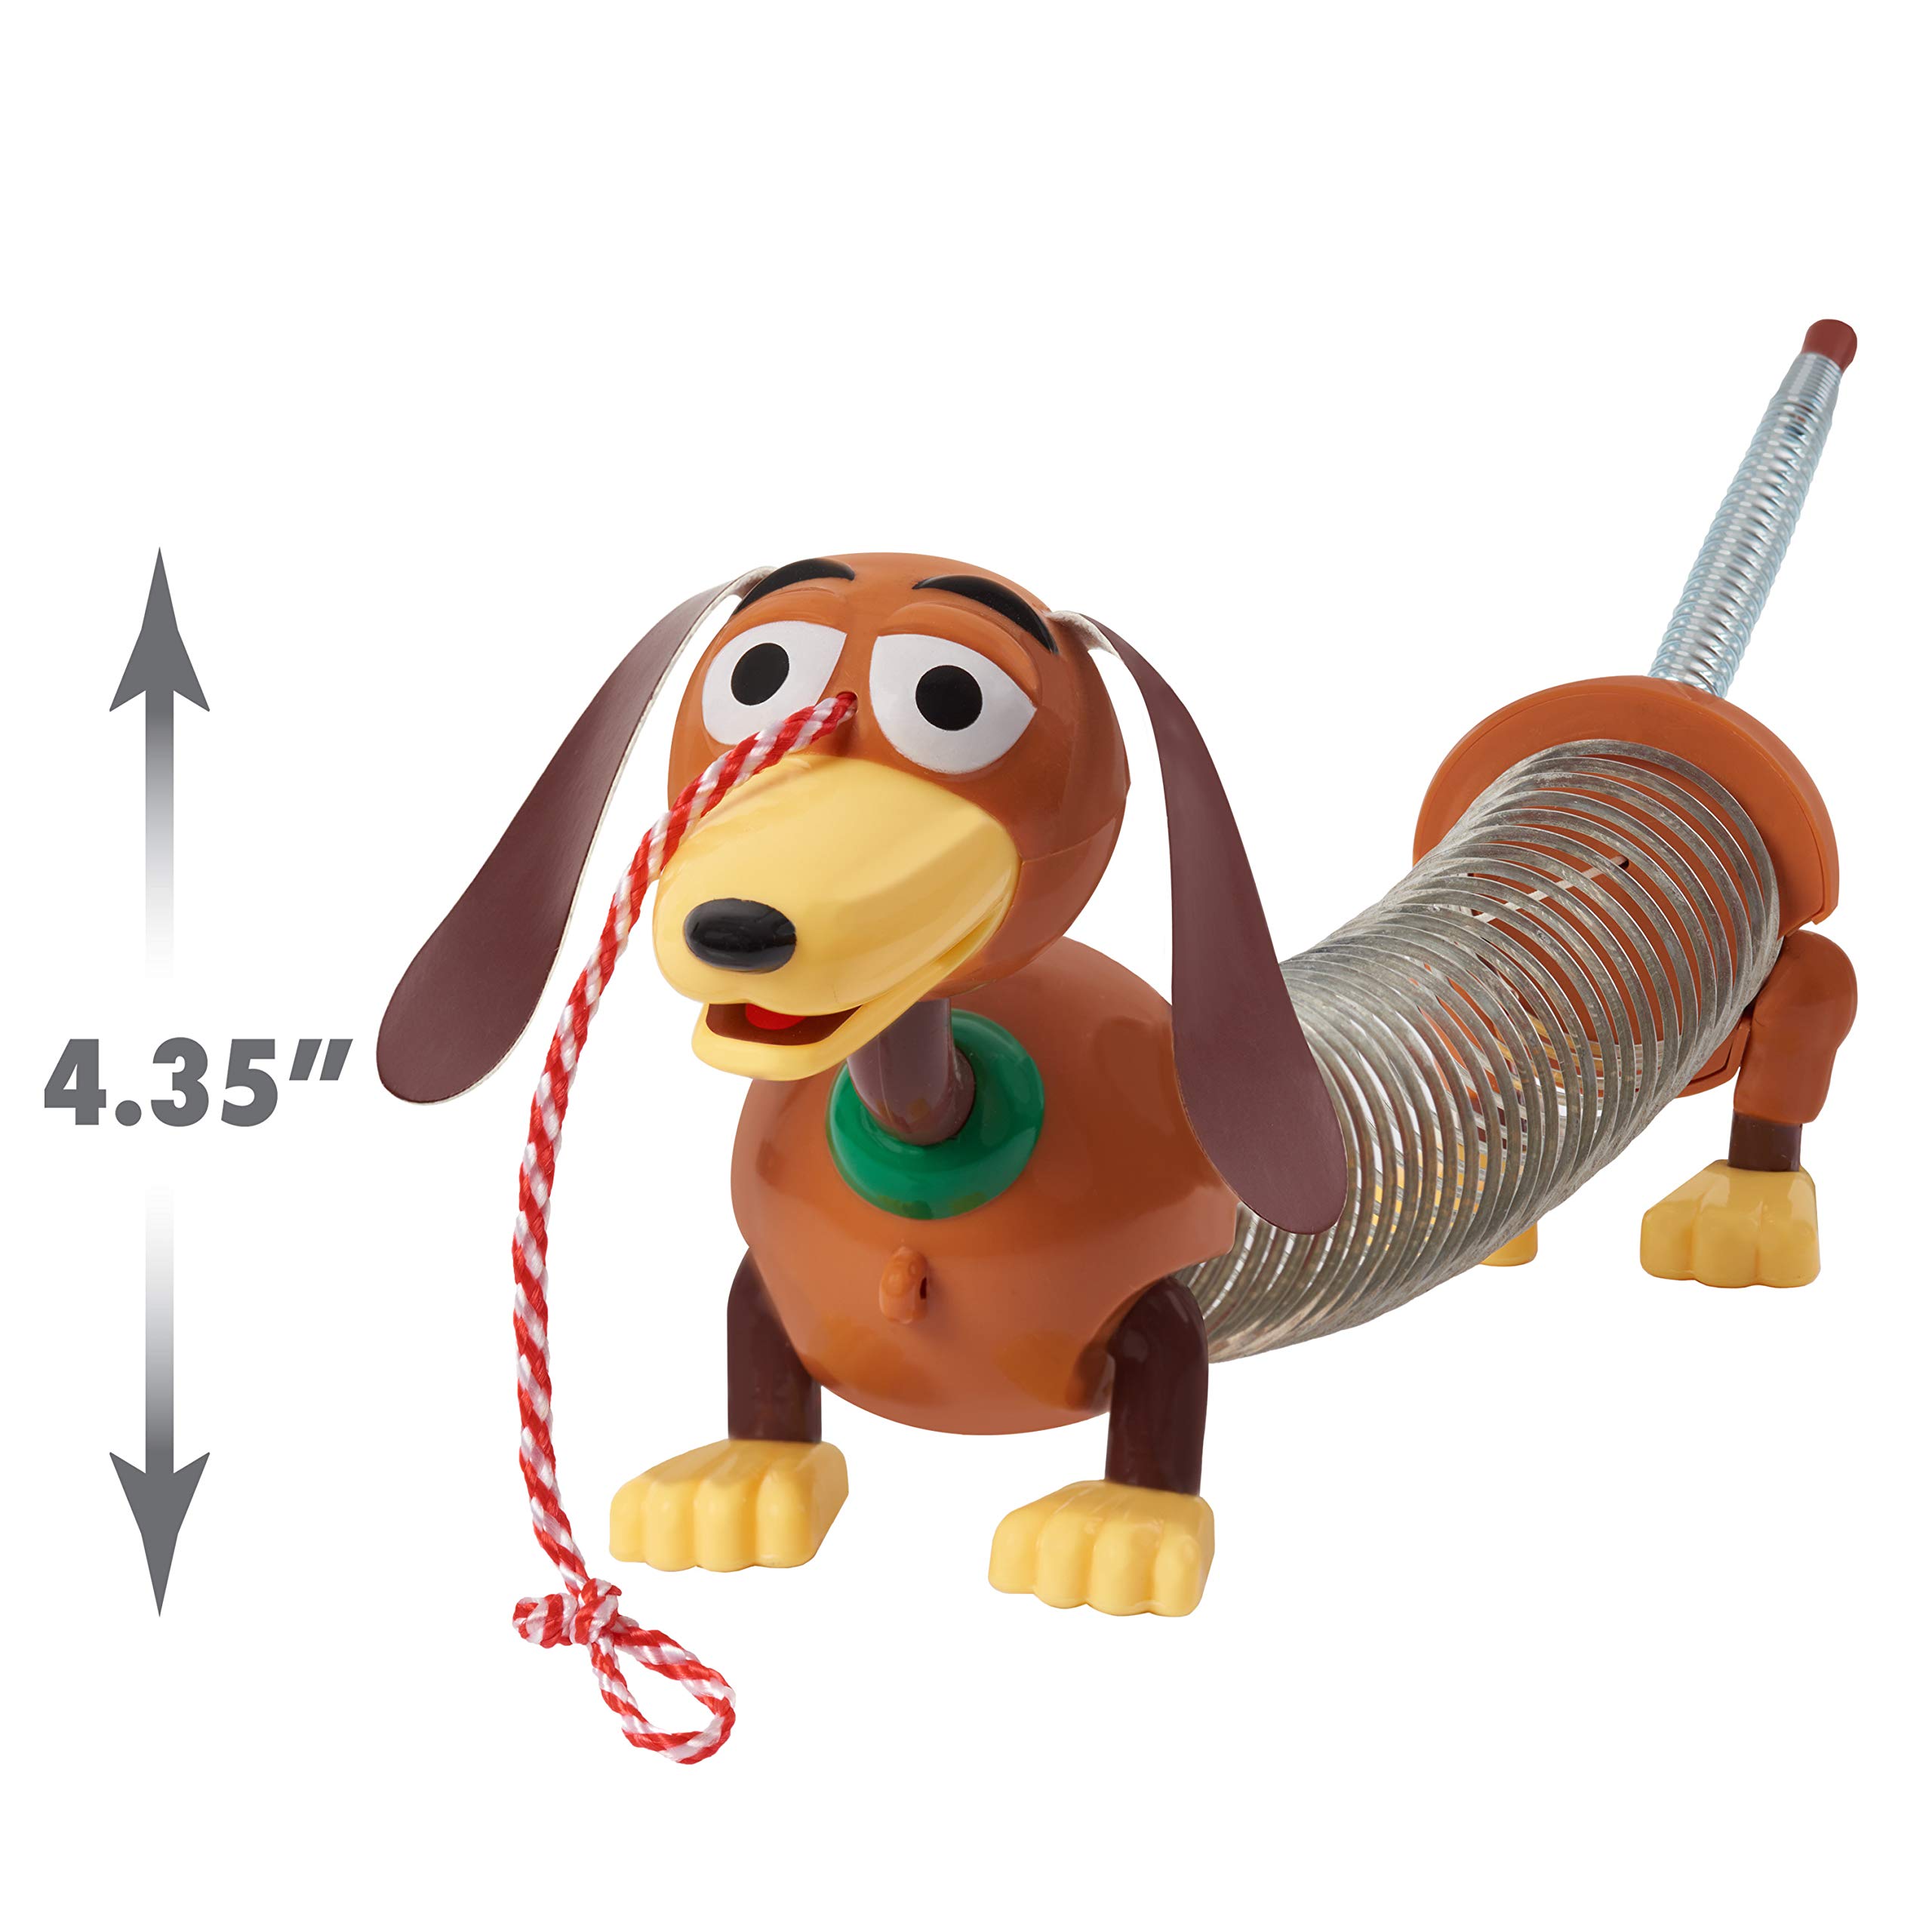 Disney and Pixar Toy Story Slinky Dog Jr Pull Toy, Toys for 3 Year Old Girls and Boys, by Just Play